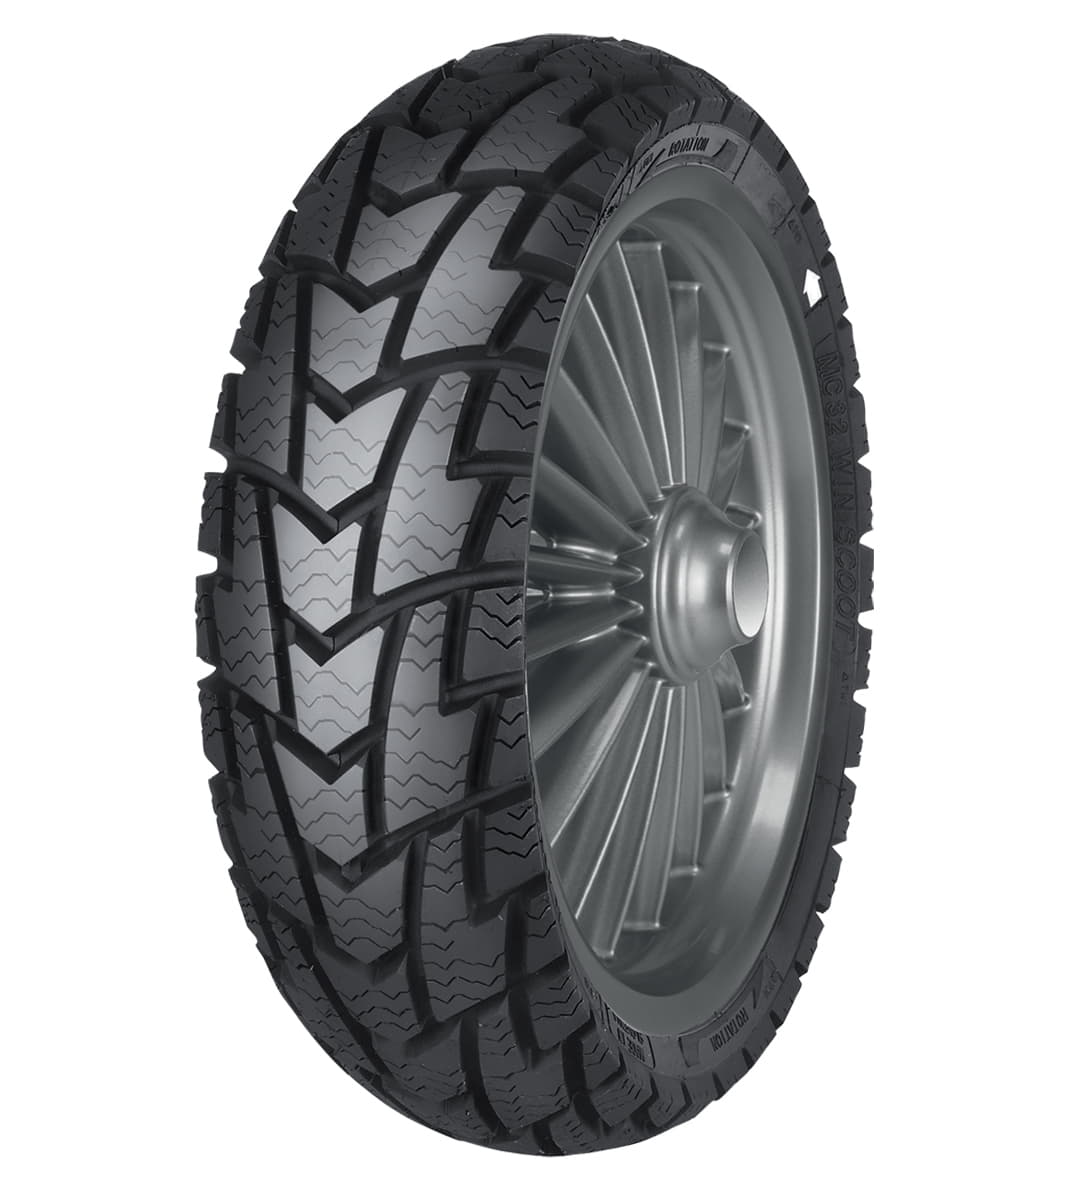 Mitas MC 32 WIN SCOOT 120/80-16 Scooter Winter 60P Front, Rear Tire Motorcycle Tires Mitas 